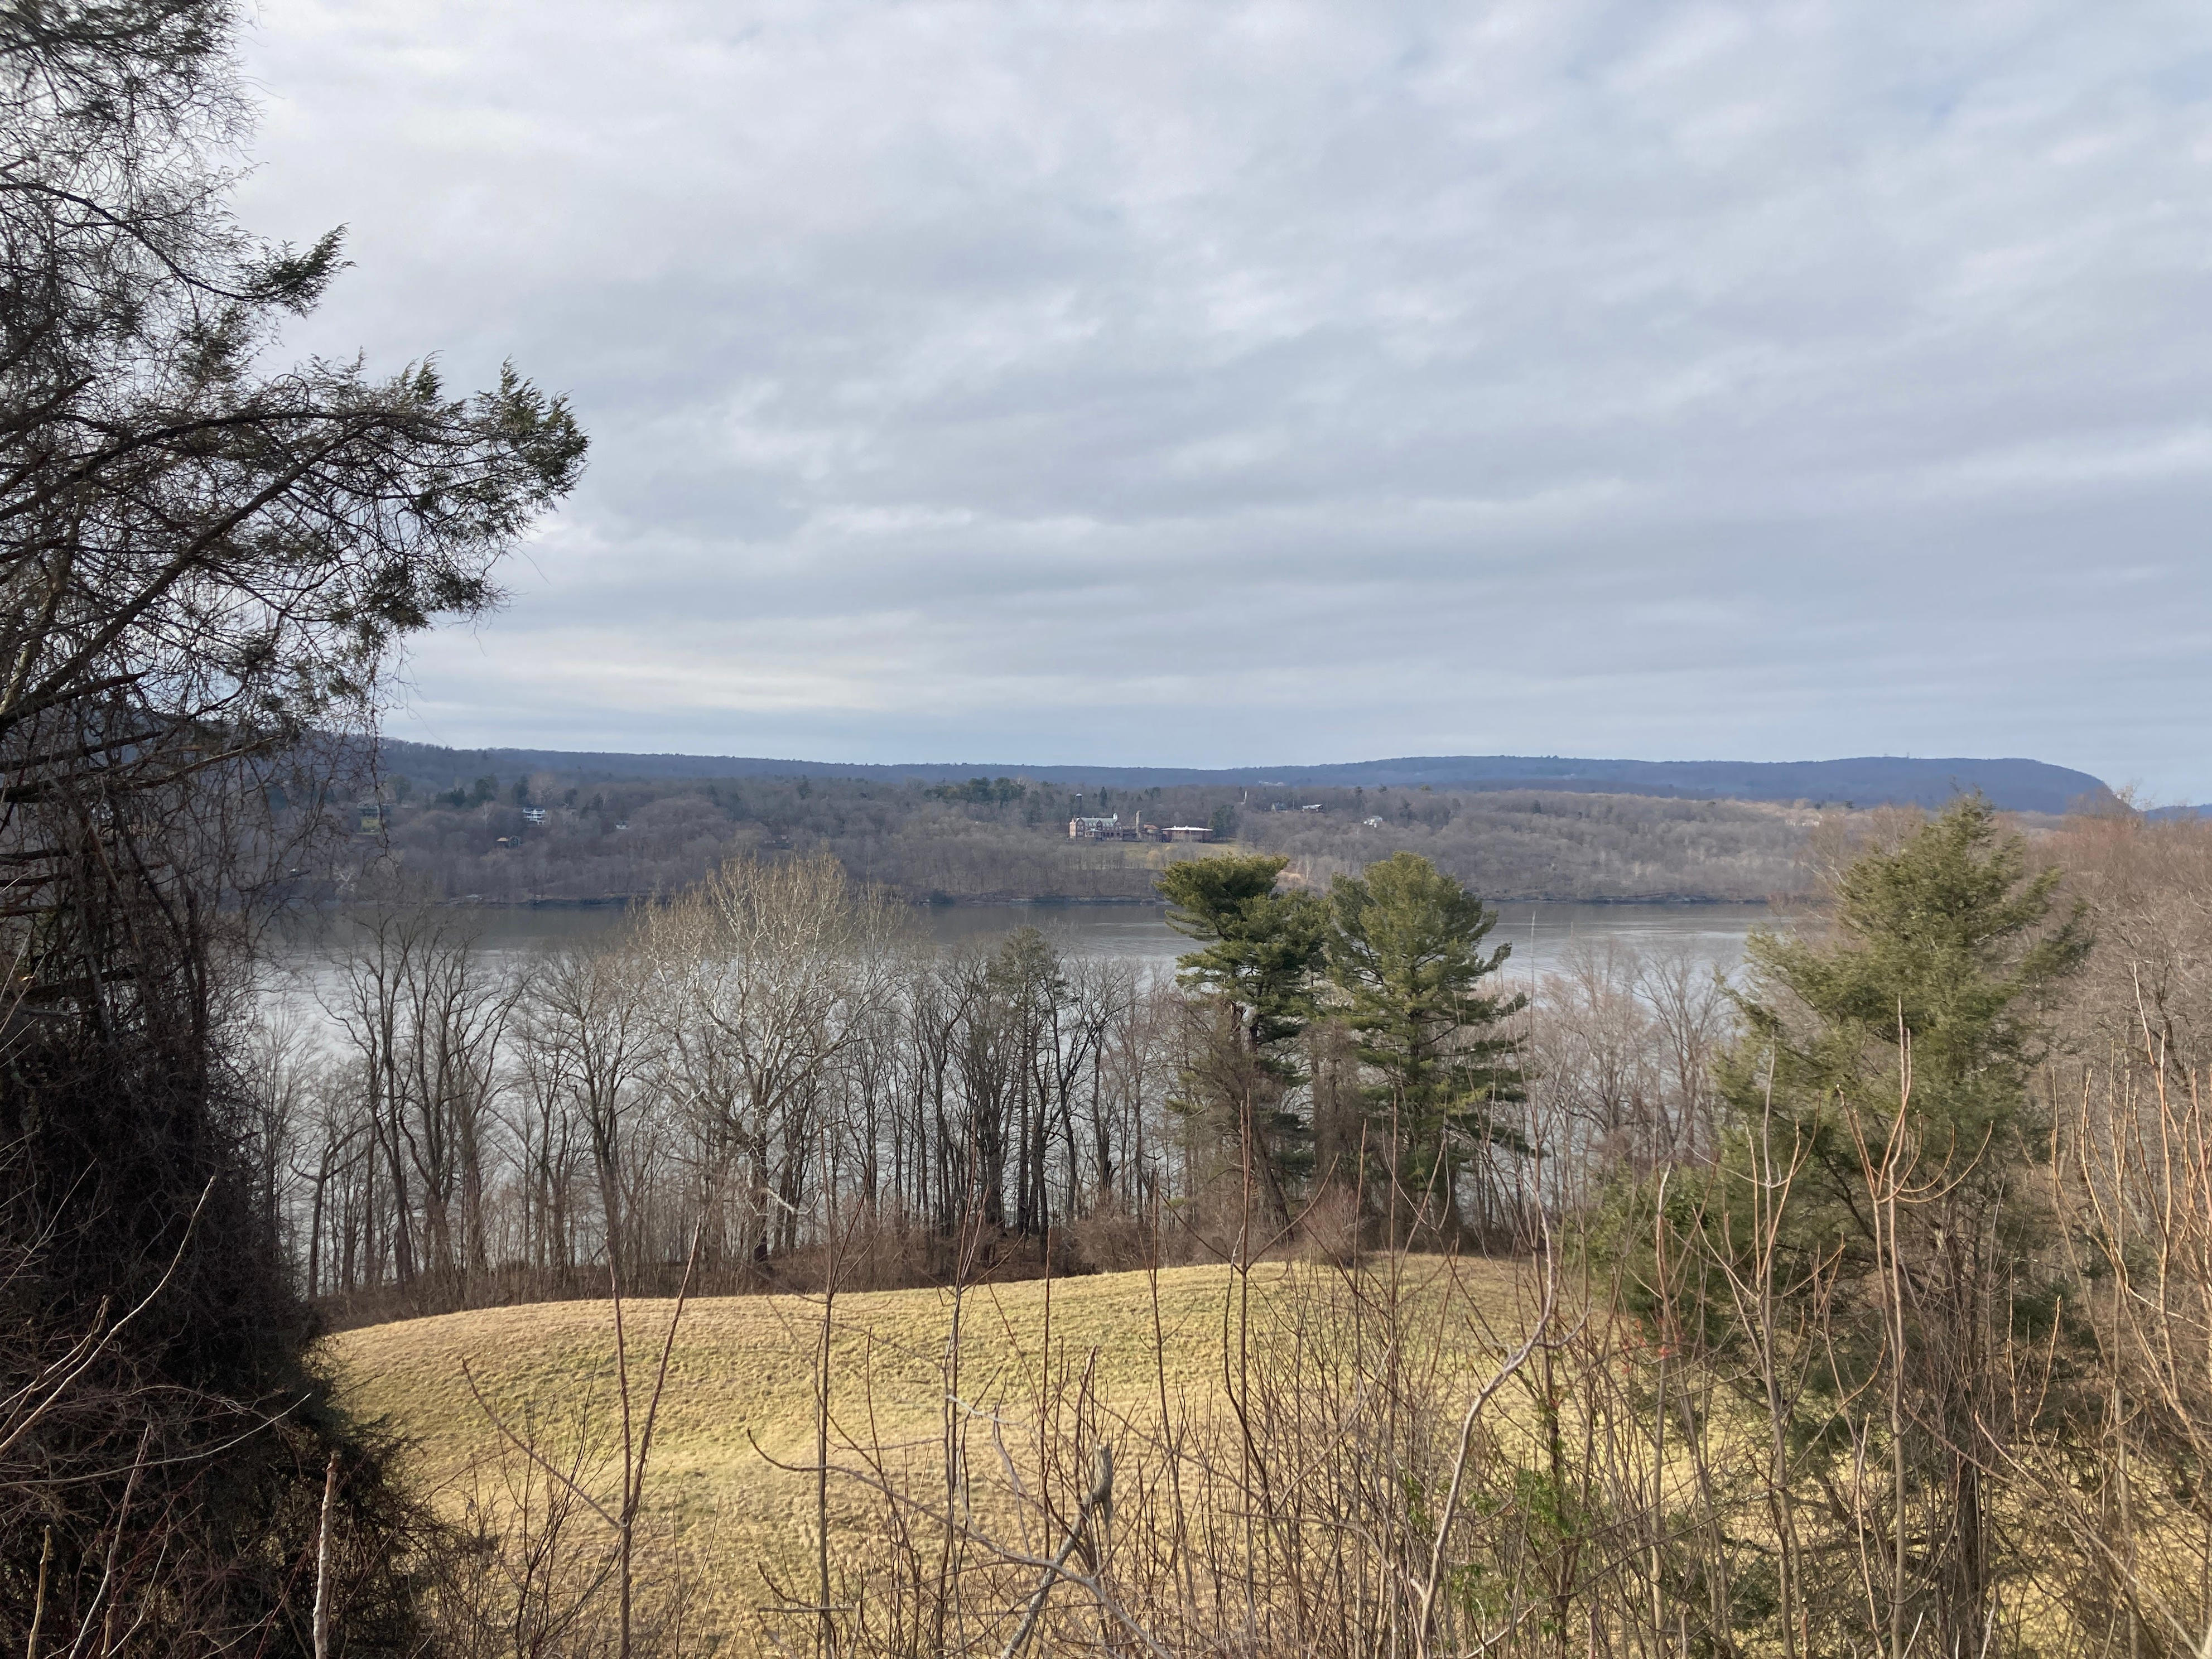 <p>The mansion is situated on 153 acres of land in the scenic Hudson Valley.</p><p>As our tour guide put it, "It's like they get to live in a beautiful landscape painting whenever they wish."</p>